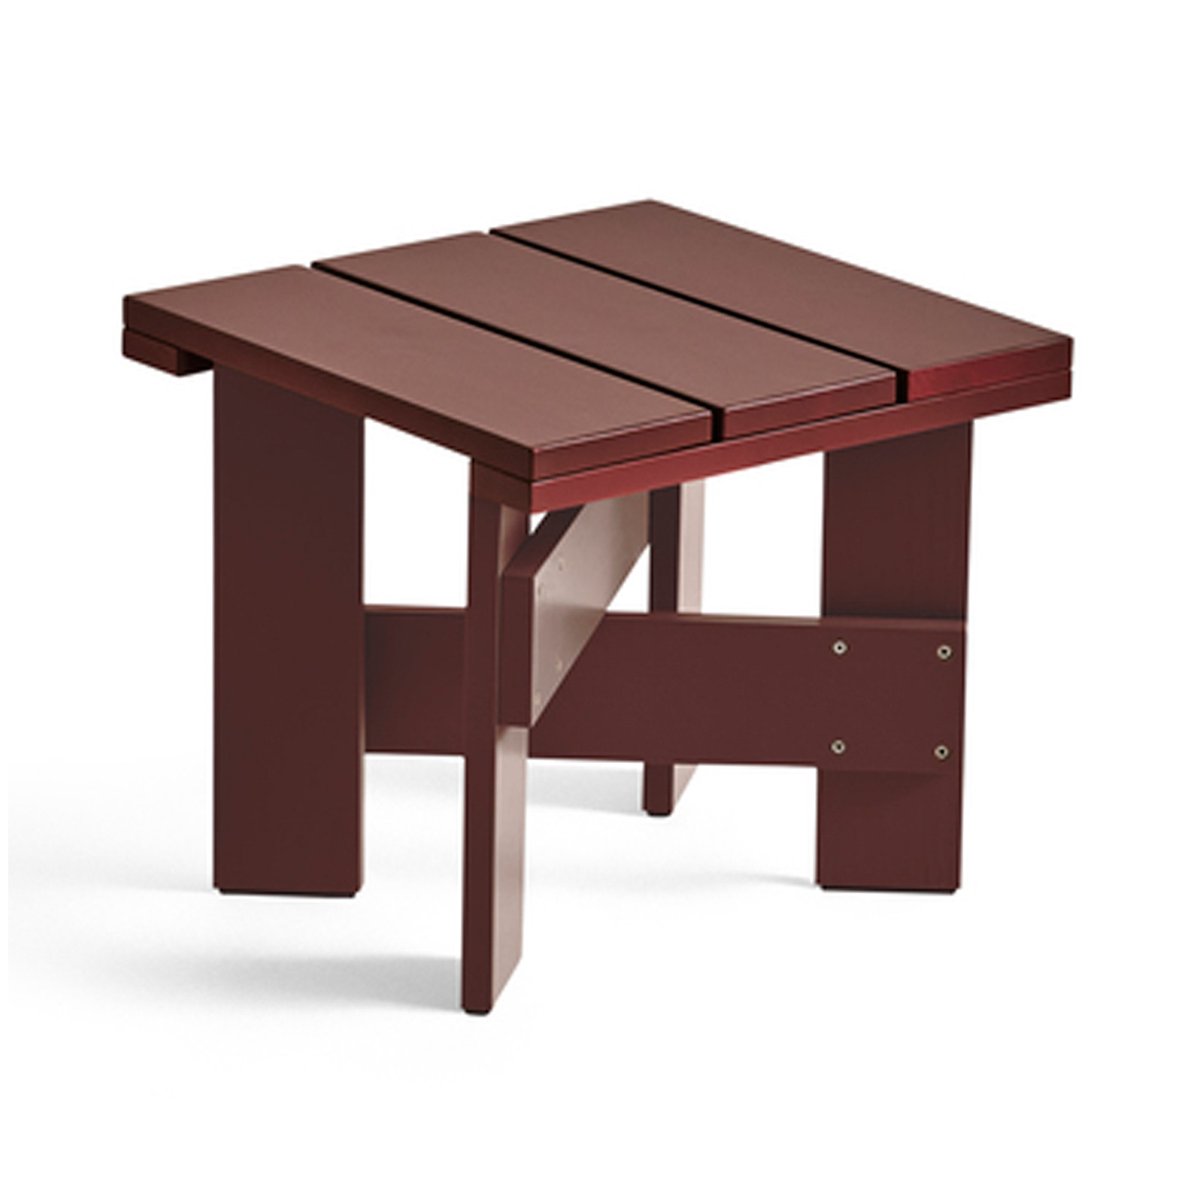 HAY Crate Low Table tafel 45x45x40 cm gelakt sparrenhout Iron red